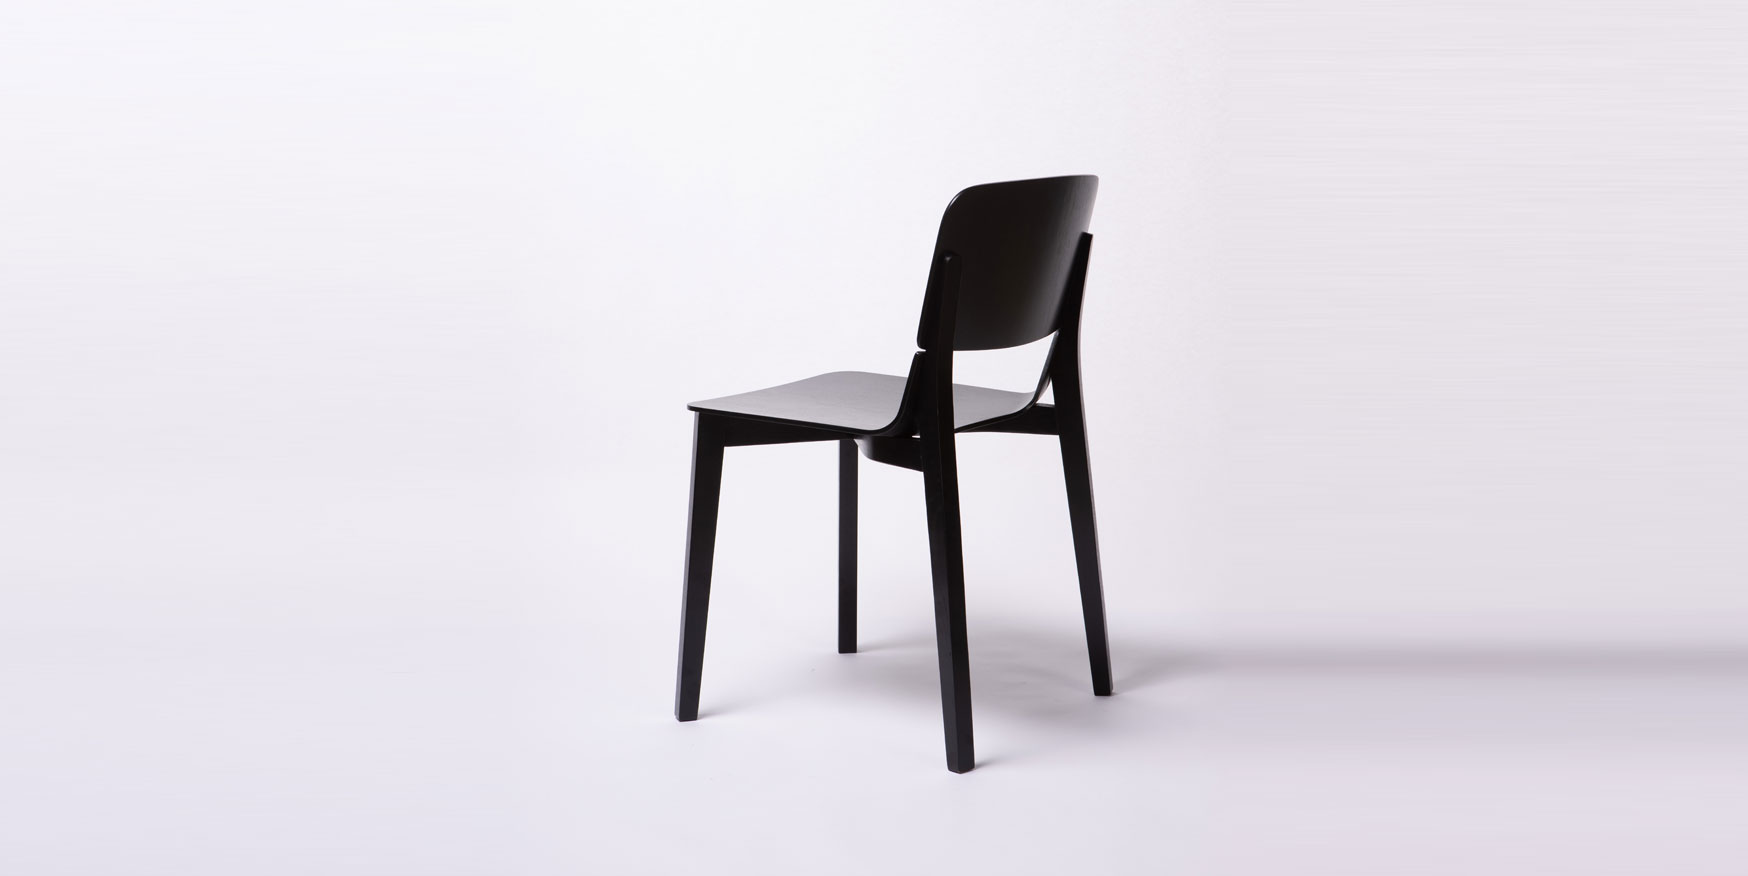 C25 Dining Chair Modern Nordic Wooden Chair Plywood Chair Bentwood Chair